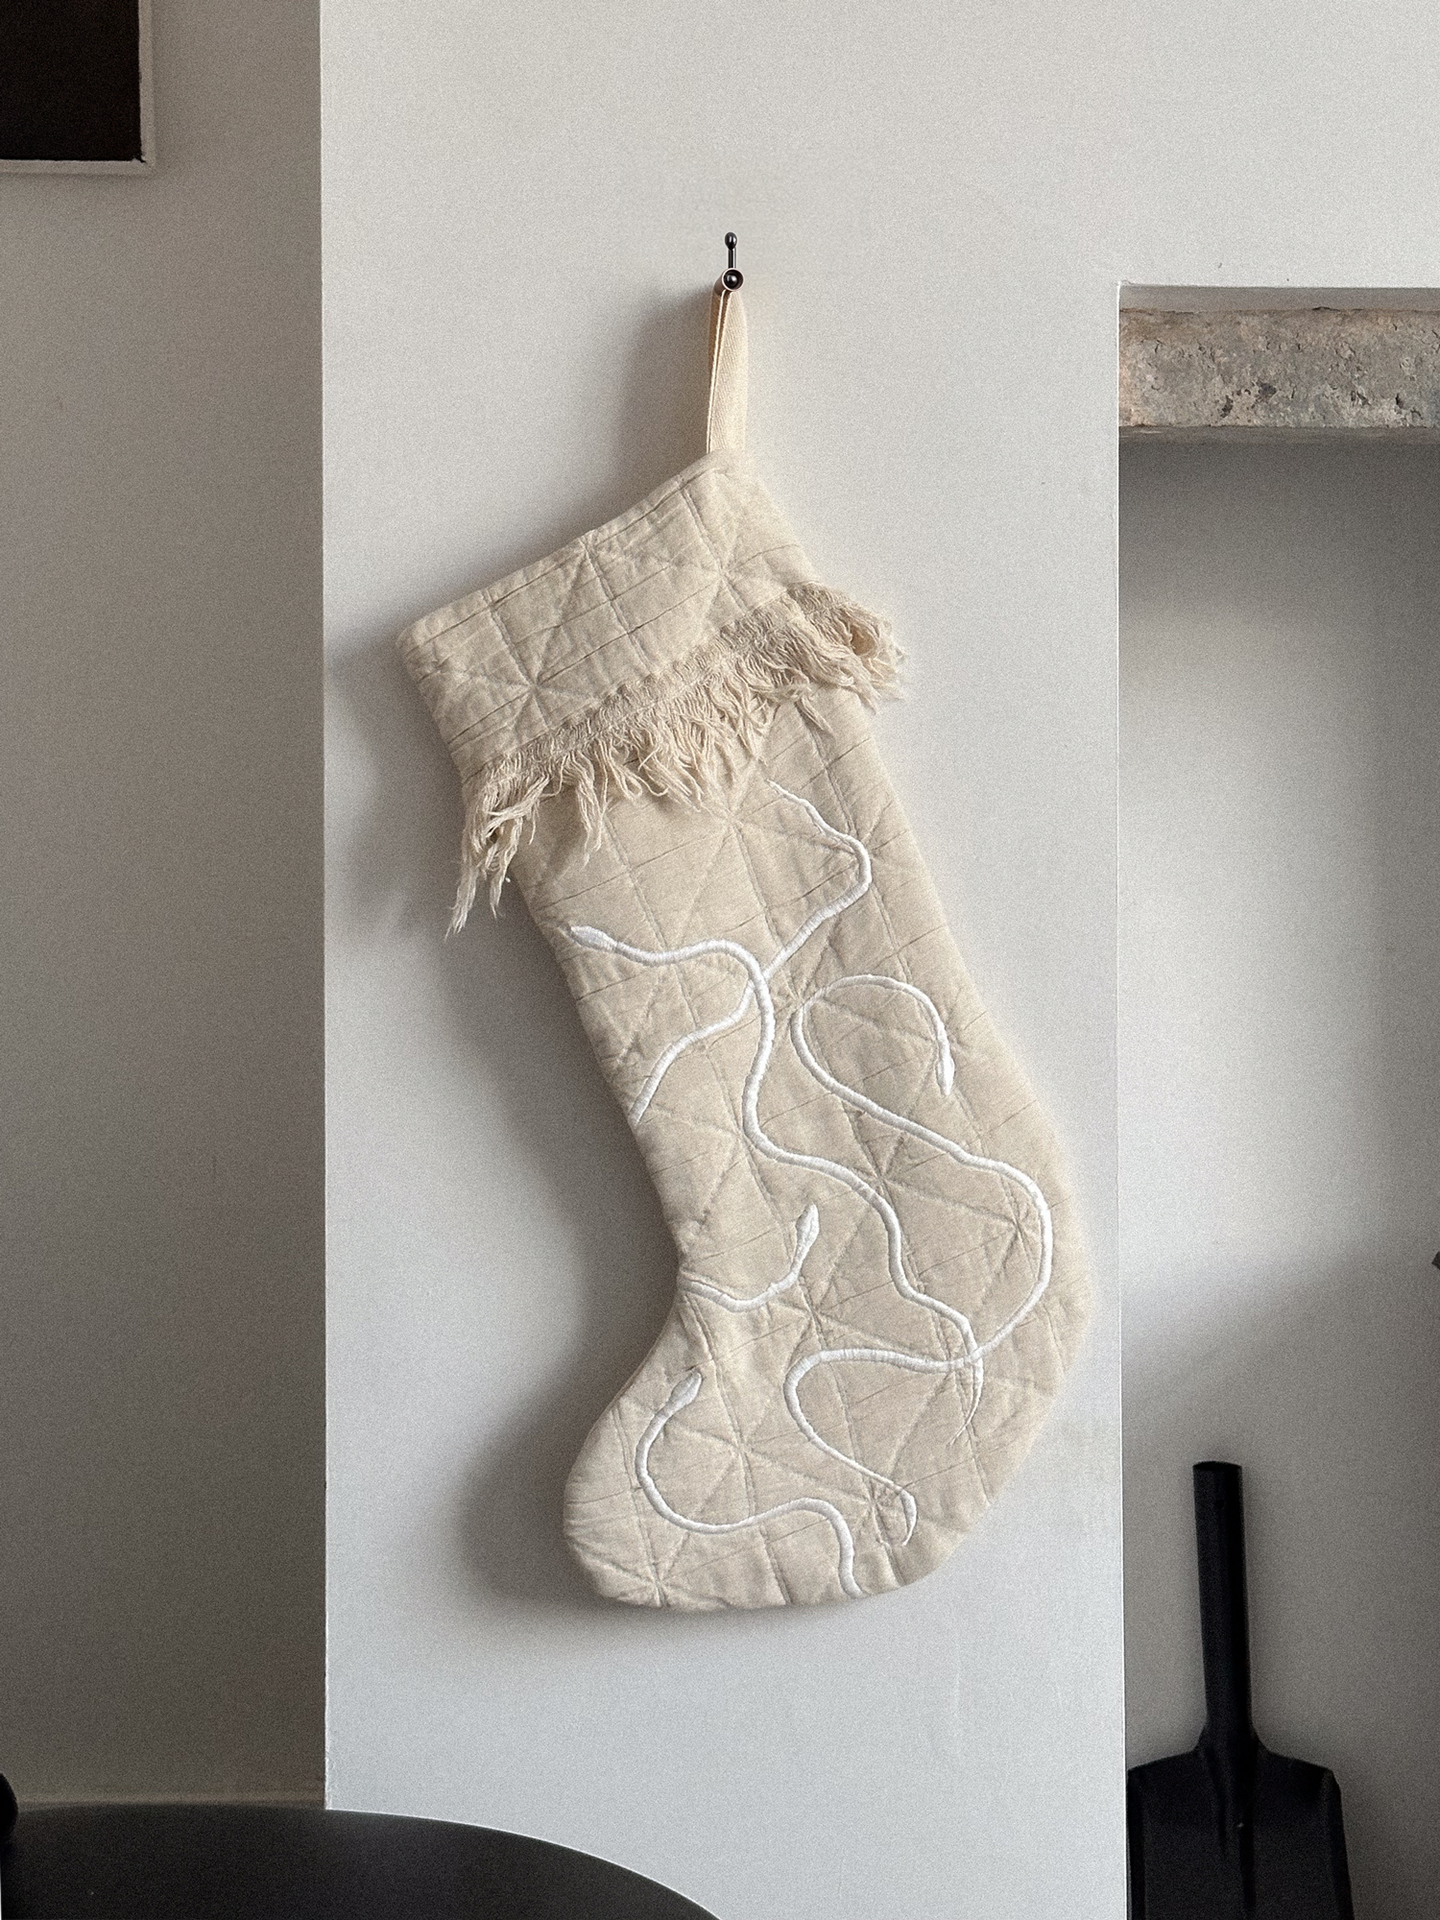 Embroidered Jacquard Stocking